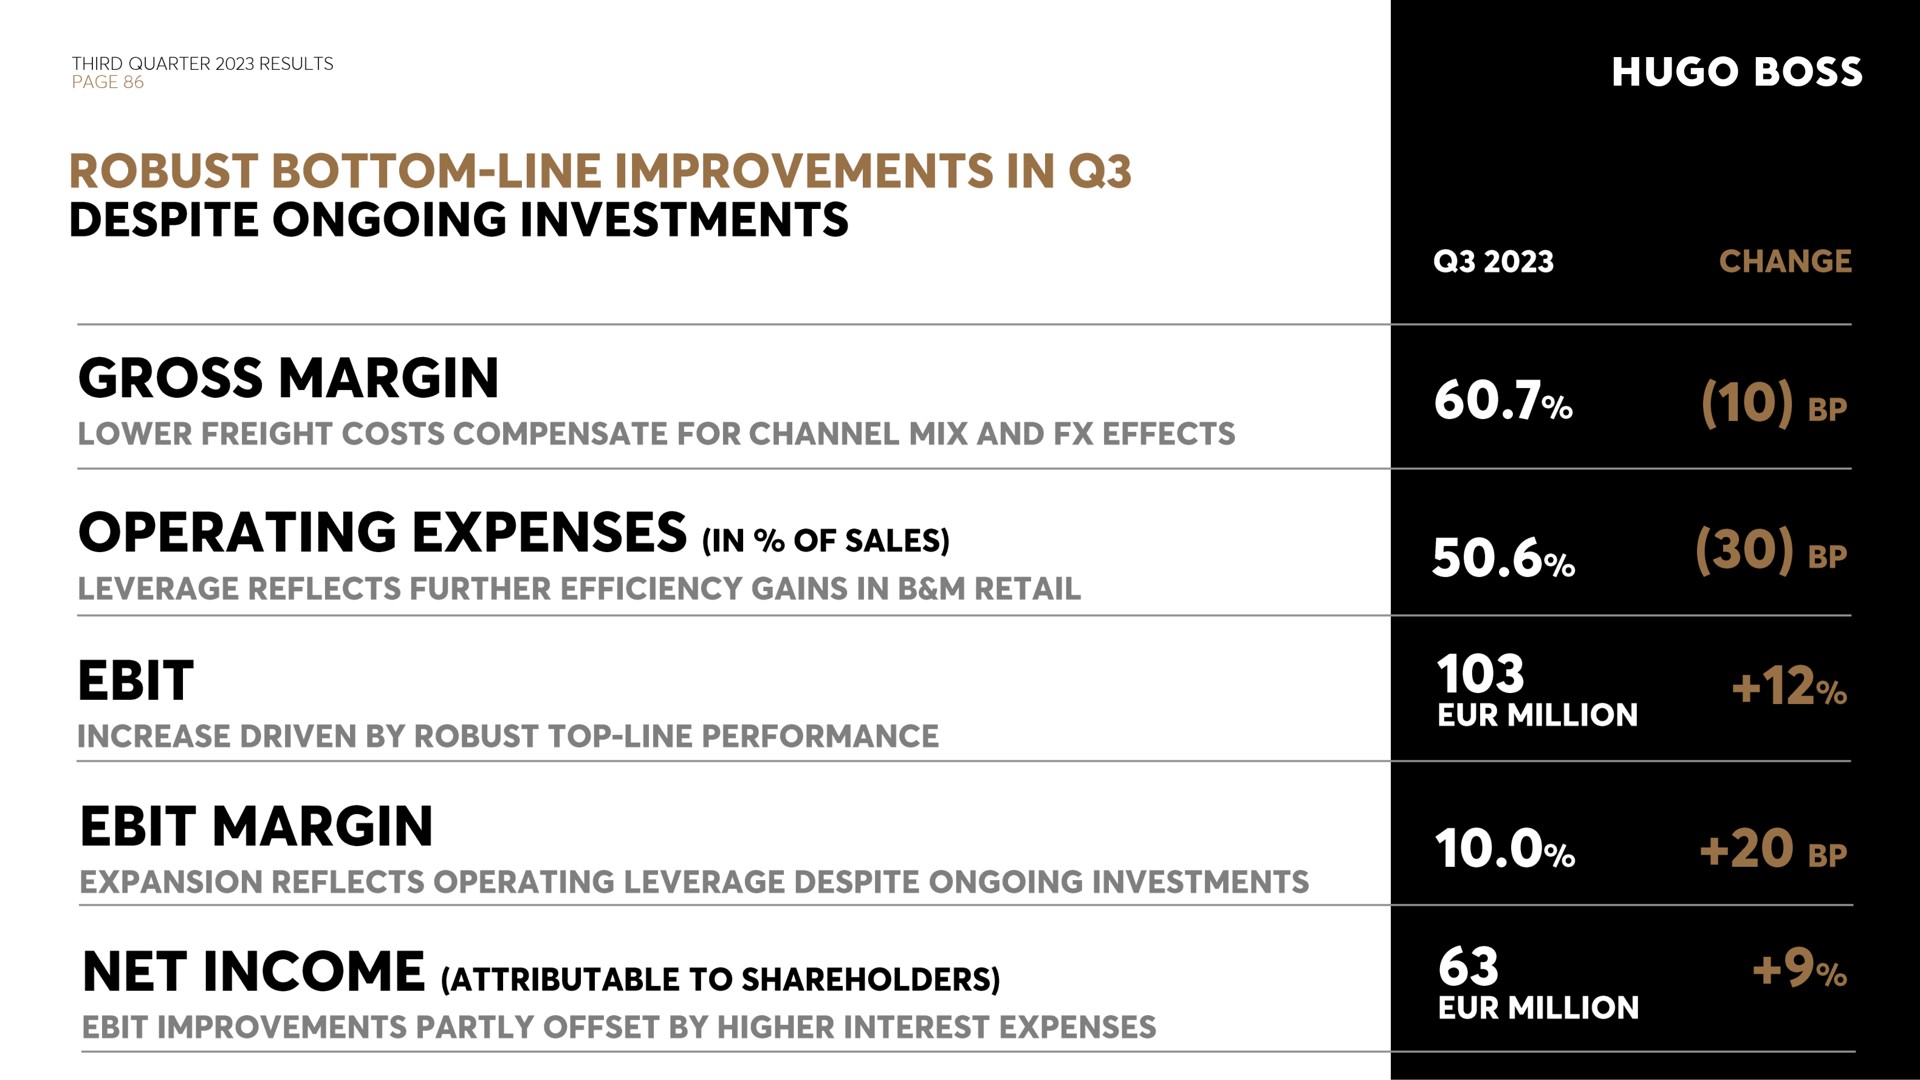 robust bottom line improvements in despite ongoing investments gross margin lower freight costs compensate for channel mix and effects operating expenses in of sates leverage reflects further efficiency gains in retail increase driven by robust top line performance margin expansion reflects operating leverage despite ongoing investments net income to shareholders improvements partly offset by higher interest expenses boss million million | Hugo Boss